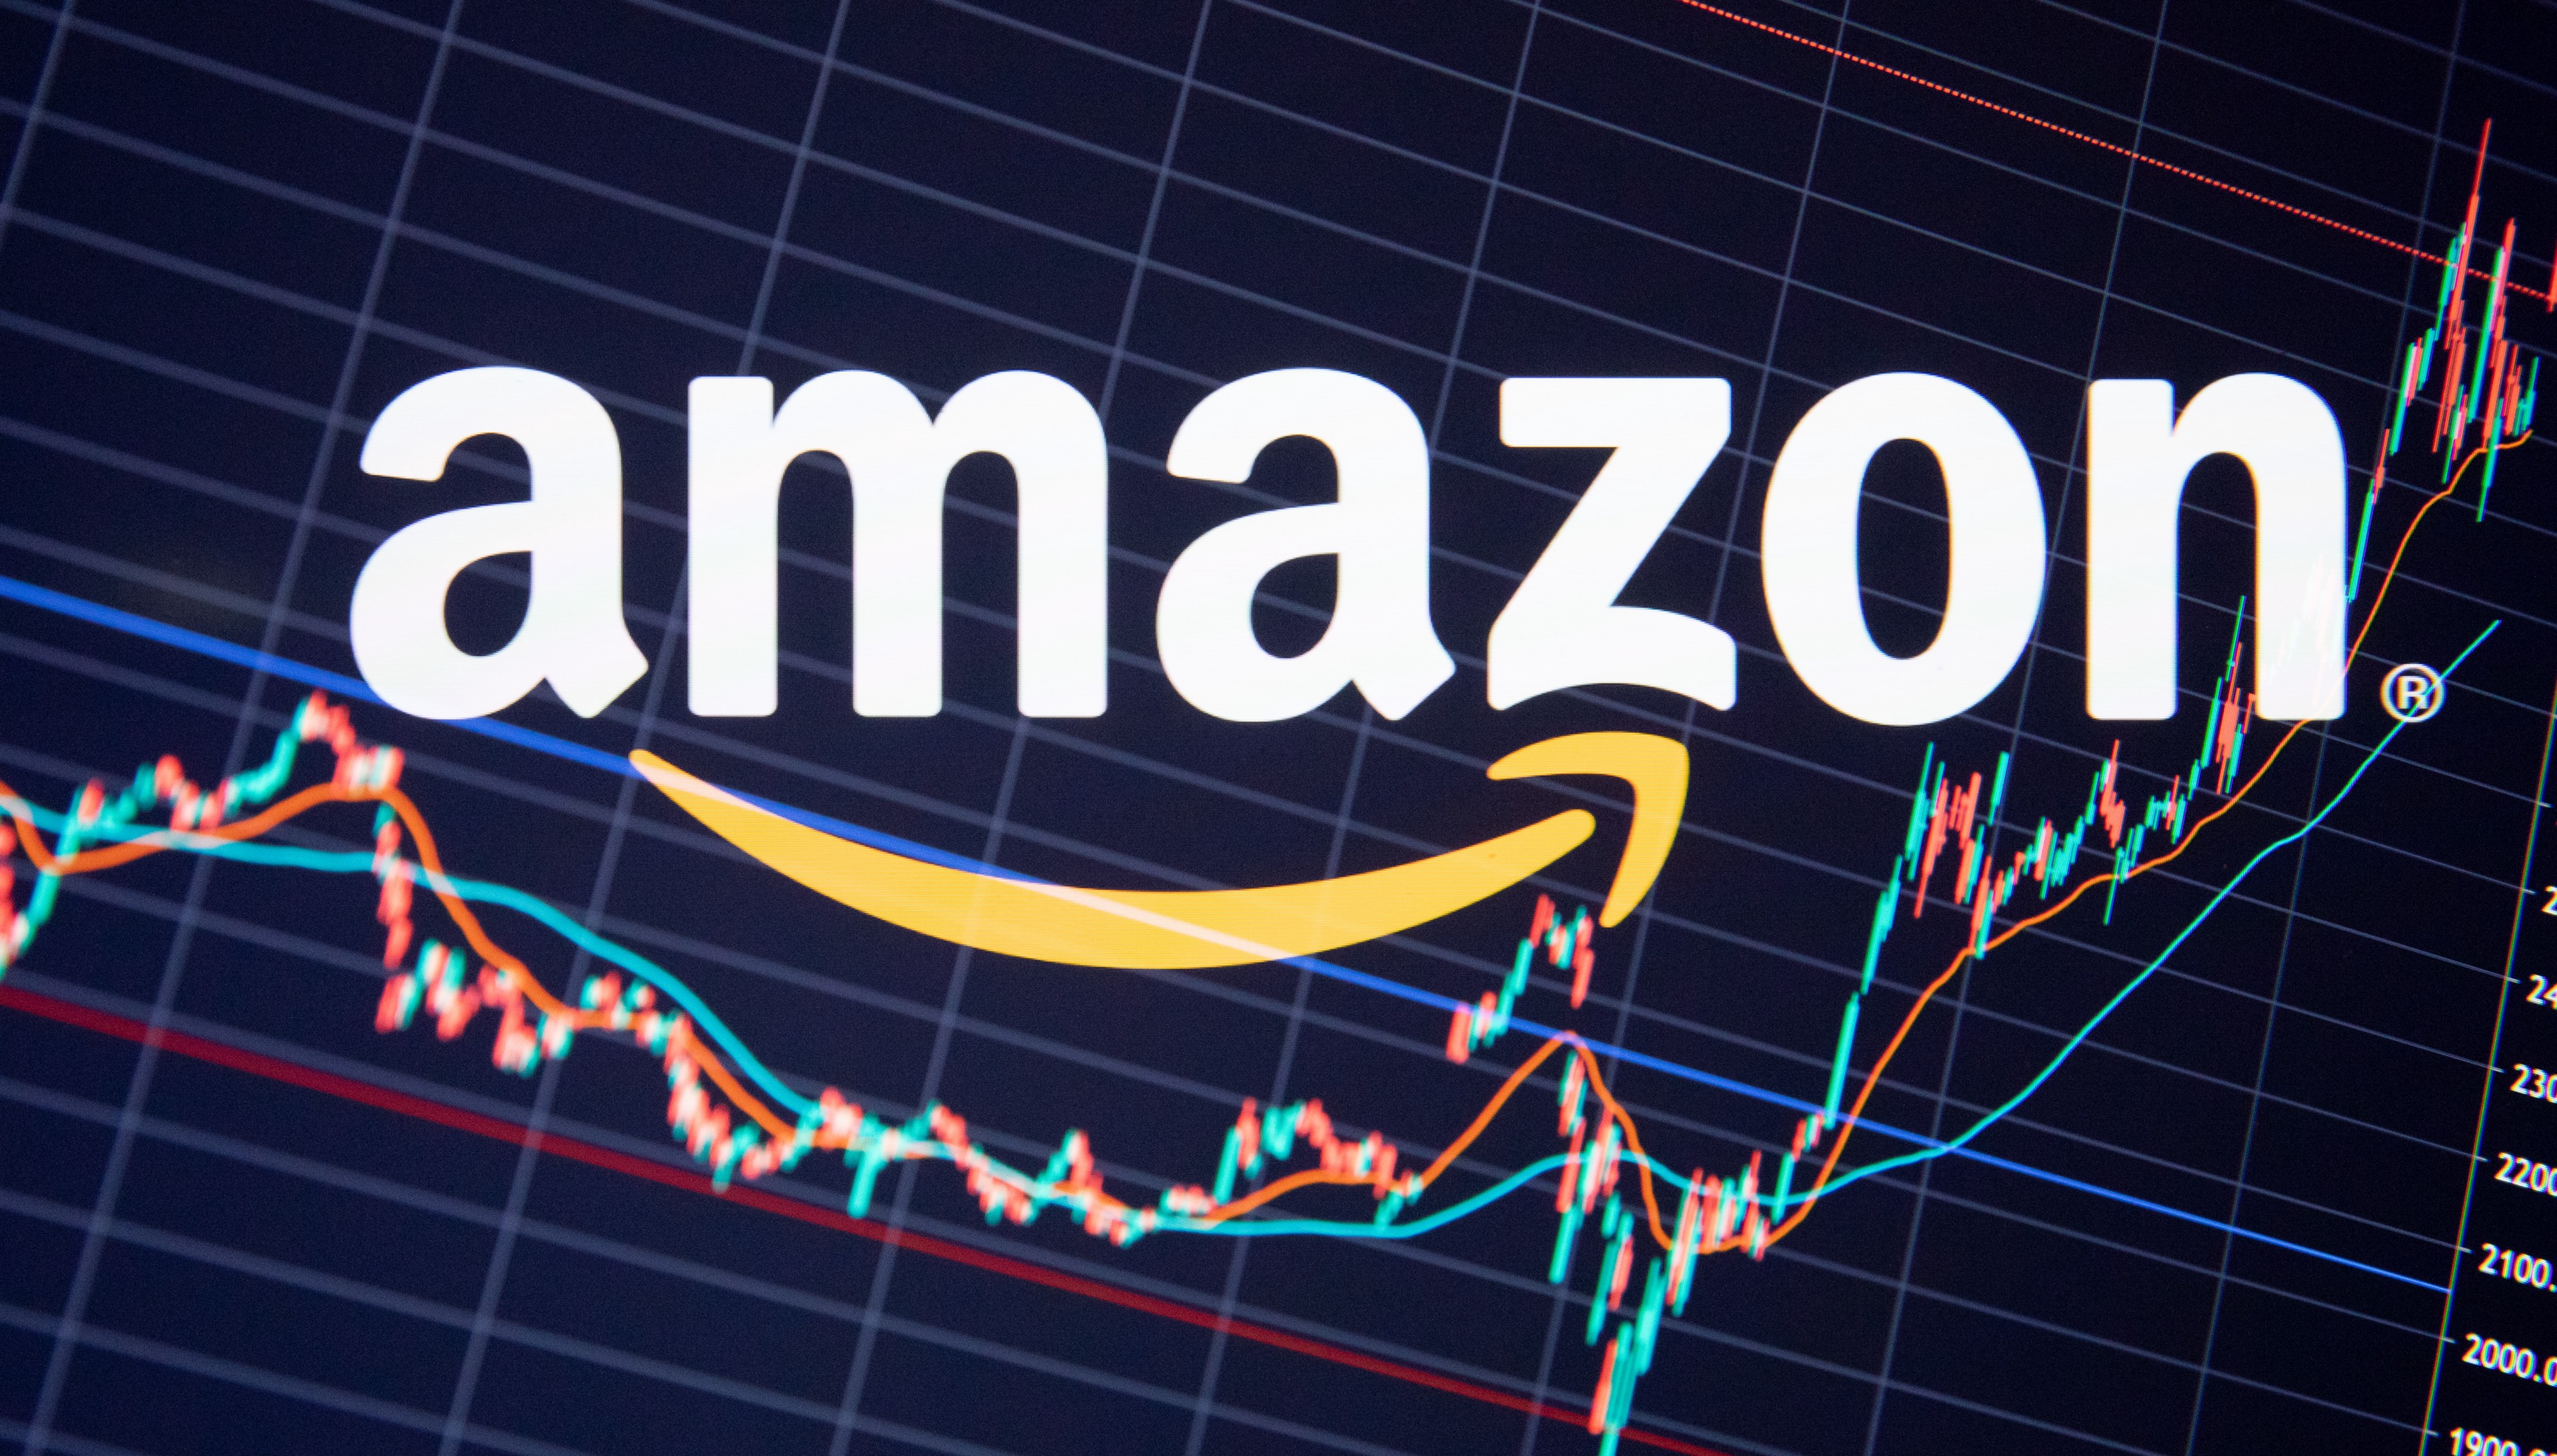 3 Stocks To Buy And Hold For Years - Amazon